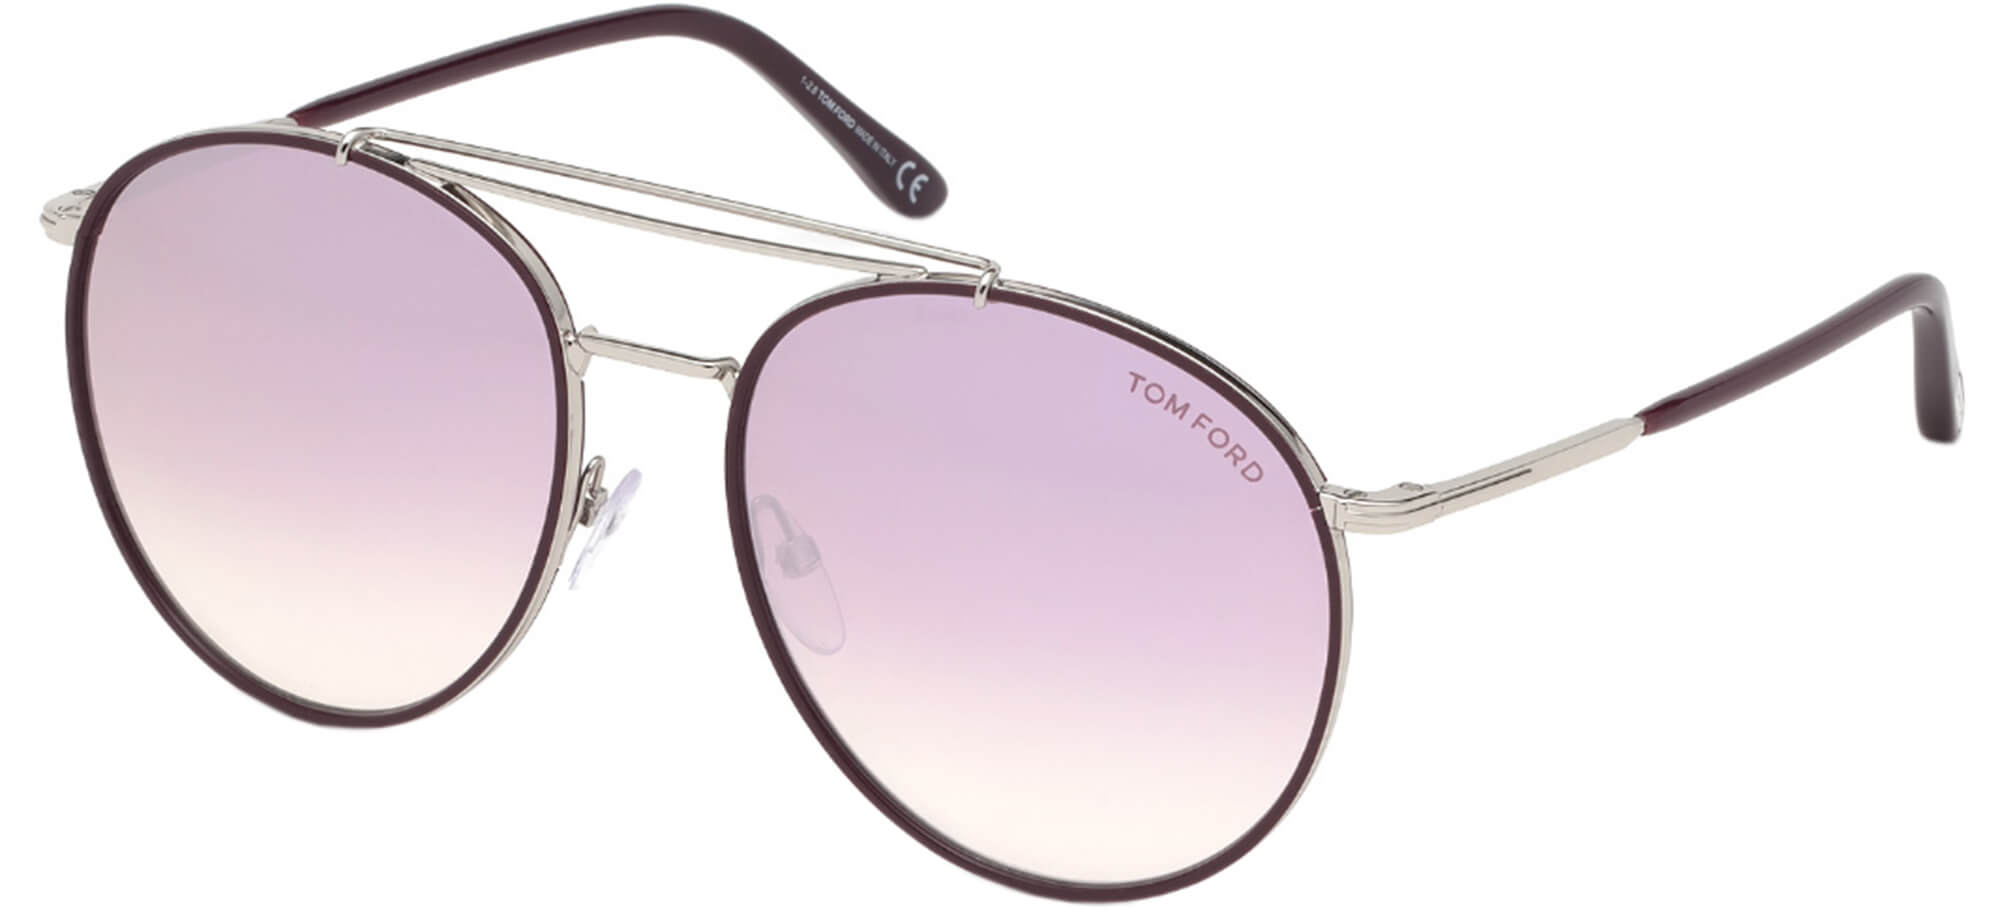 Tom FordWESLEY FT 0694Silver/red Shaded (16T)